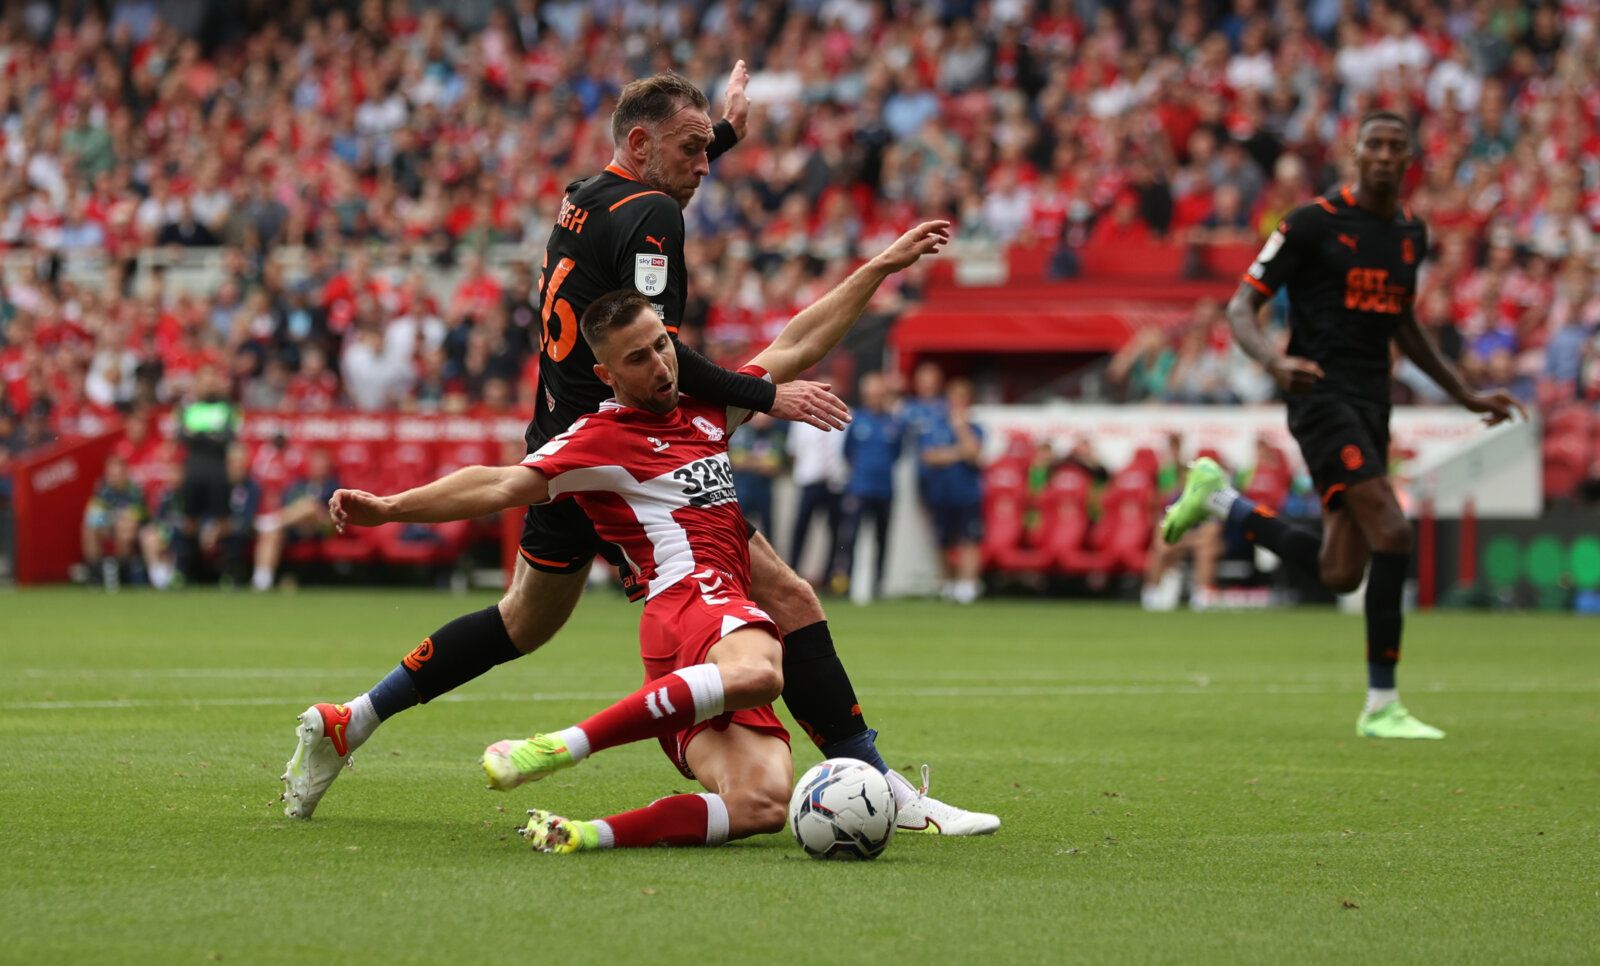 Soccer Football - Championship - Middlesbrough v Blackpool - Riverside Stadium, Middlesbrough, Britain - September 18, 2021 Blackpool's Richard Keogh in action Action Images/Lee Smith EDITORIAL USE ONLY. No use with unauthorized audio, video, data, fixture lists, club/league logos or 'live' services. Online in-match use limited to 75 images, no video emulation. No use in betting, games or single club /league/player publications.  Please contact your account representative for further details.